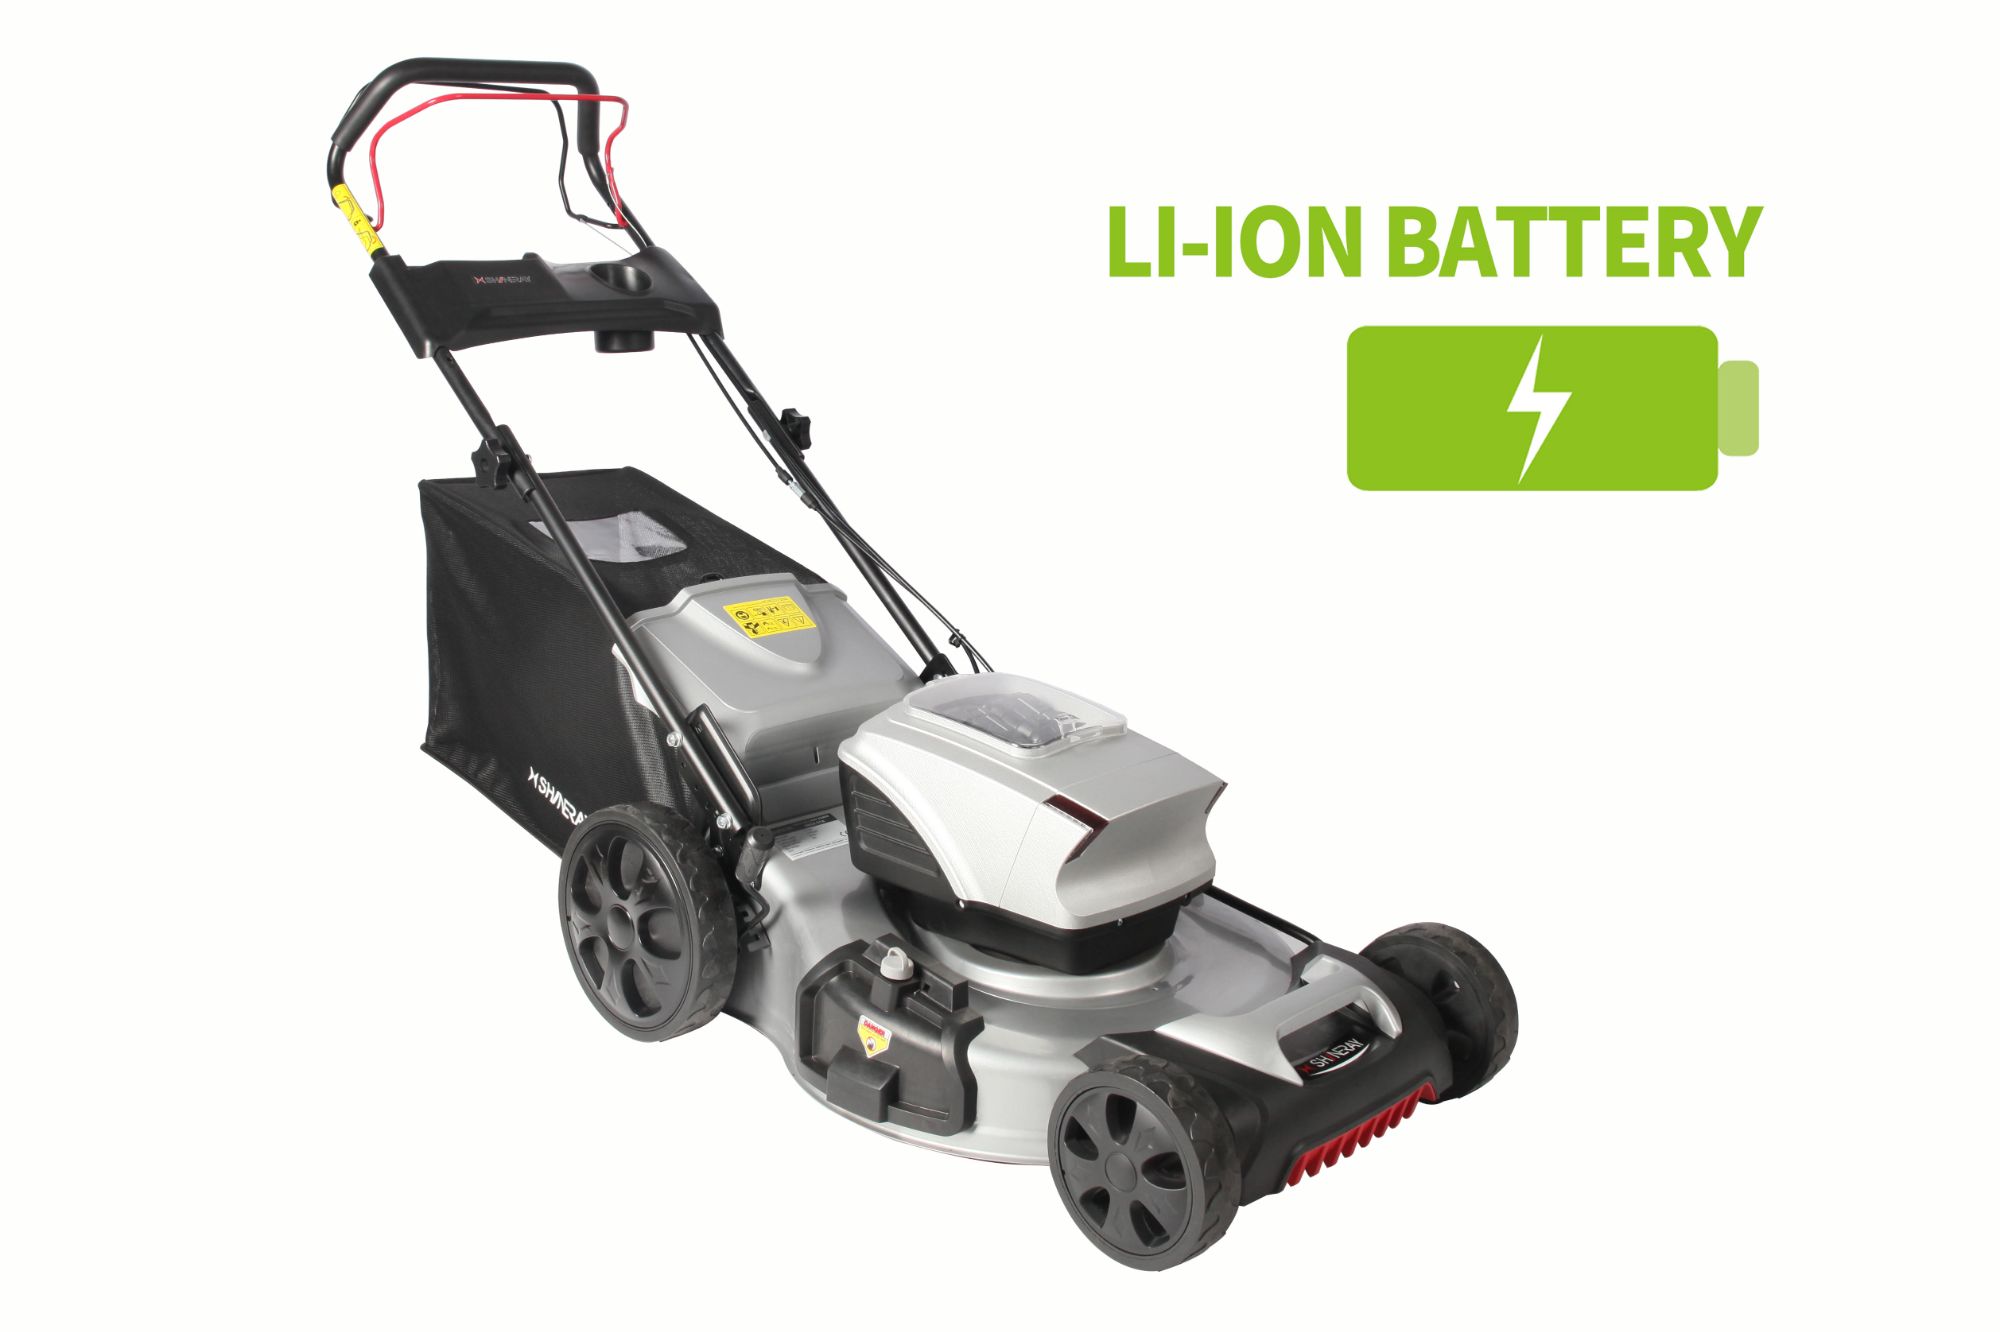 Self propelled Lawn Mower simple and convenient operaton